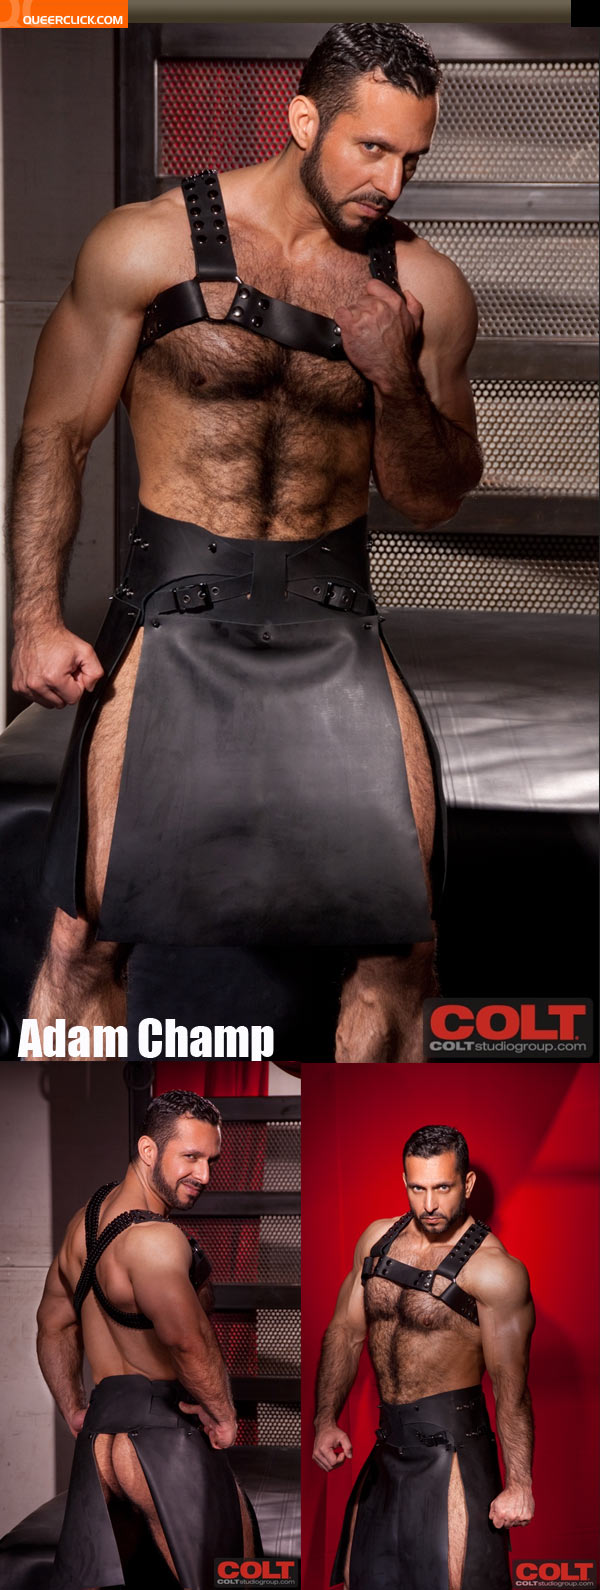 Adam Champ Leather Porn - COLT Studio Group: Adam Champ and Jessy Ares - Part 1 - QueerClick